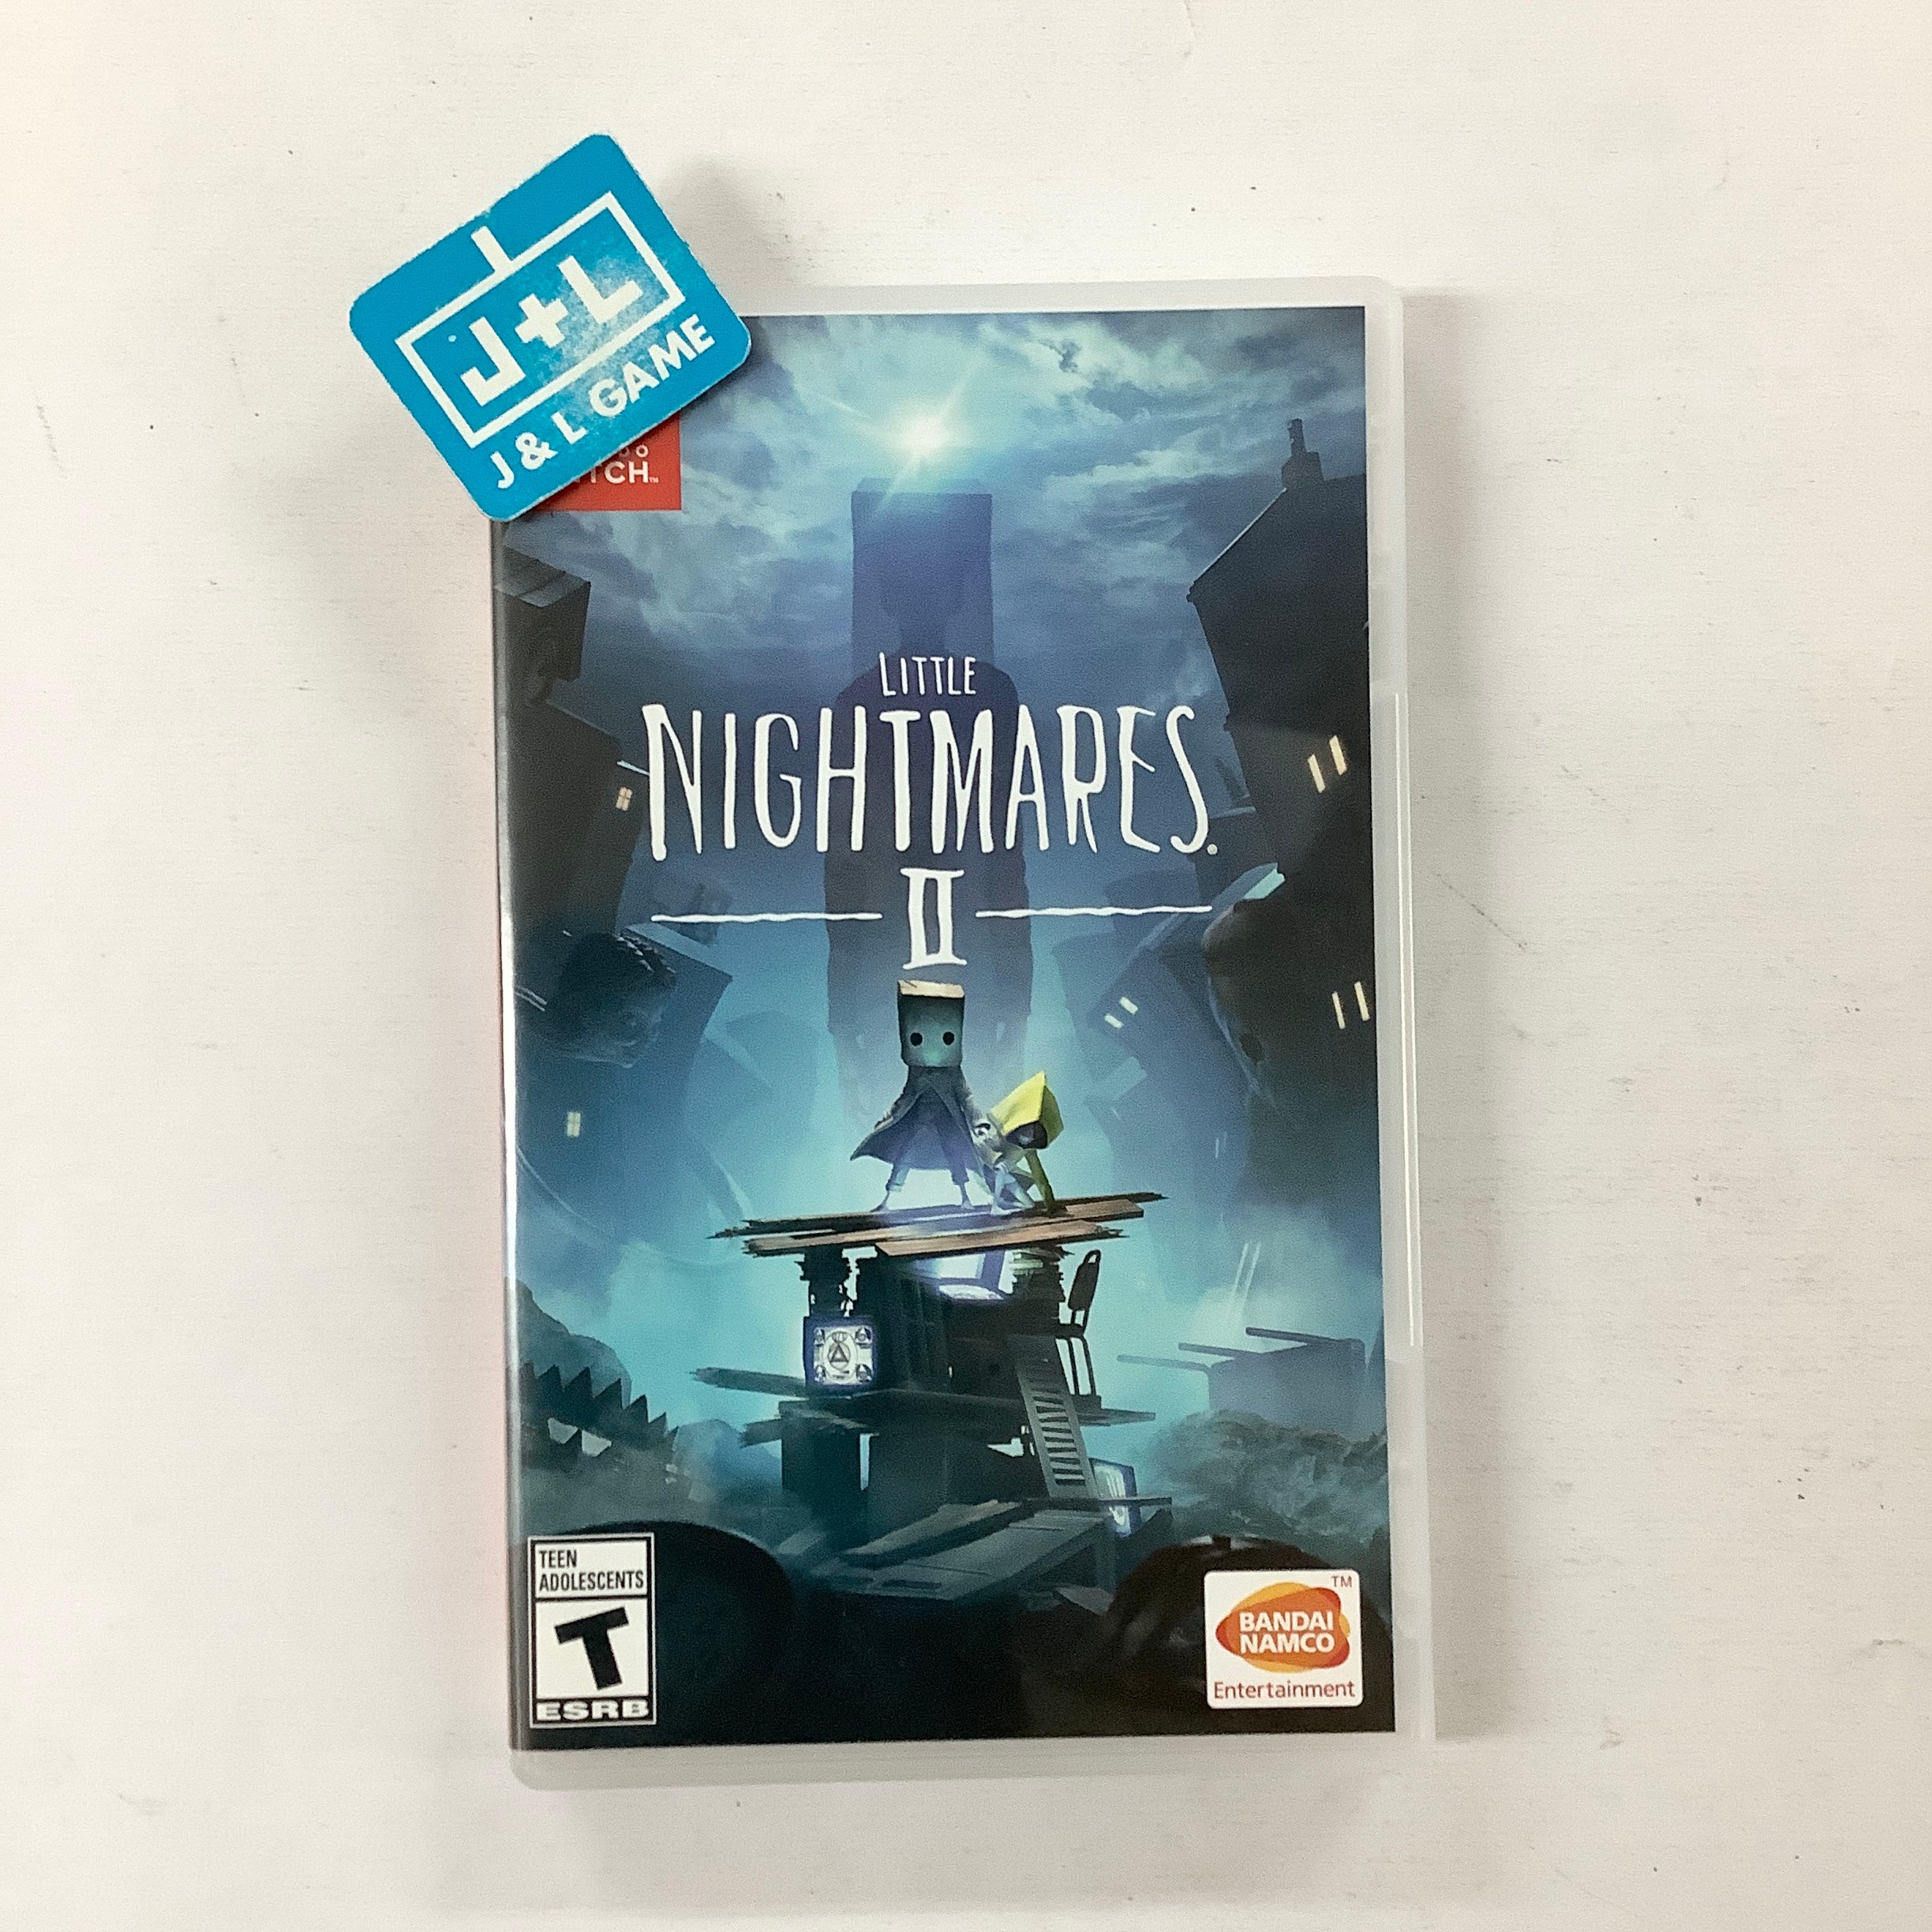 Little Nightmares II  - (NSW) Nintendo Switch [UNBOXING] Video Games BANDAI NAMCO Entertainment   